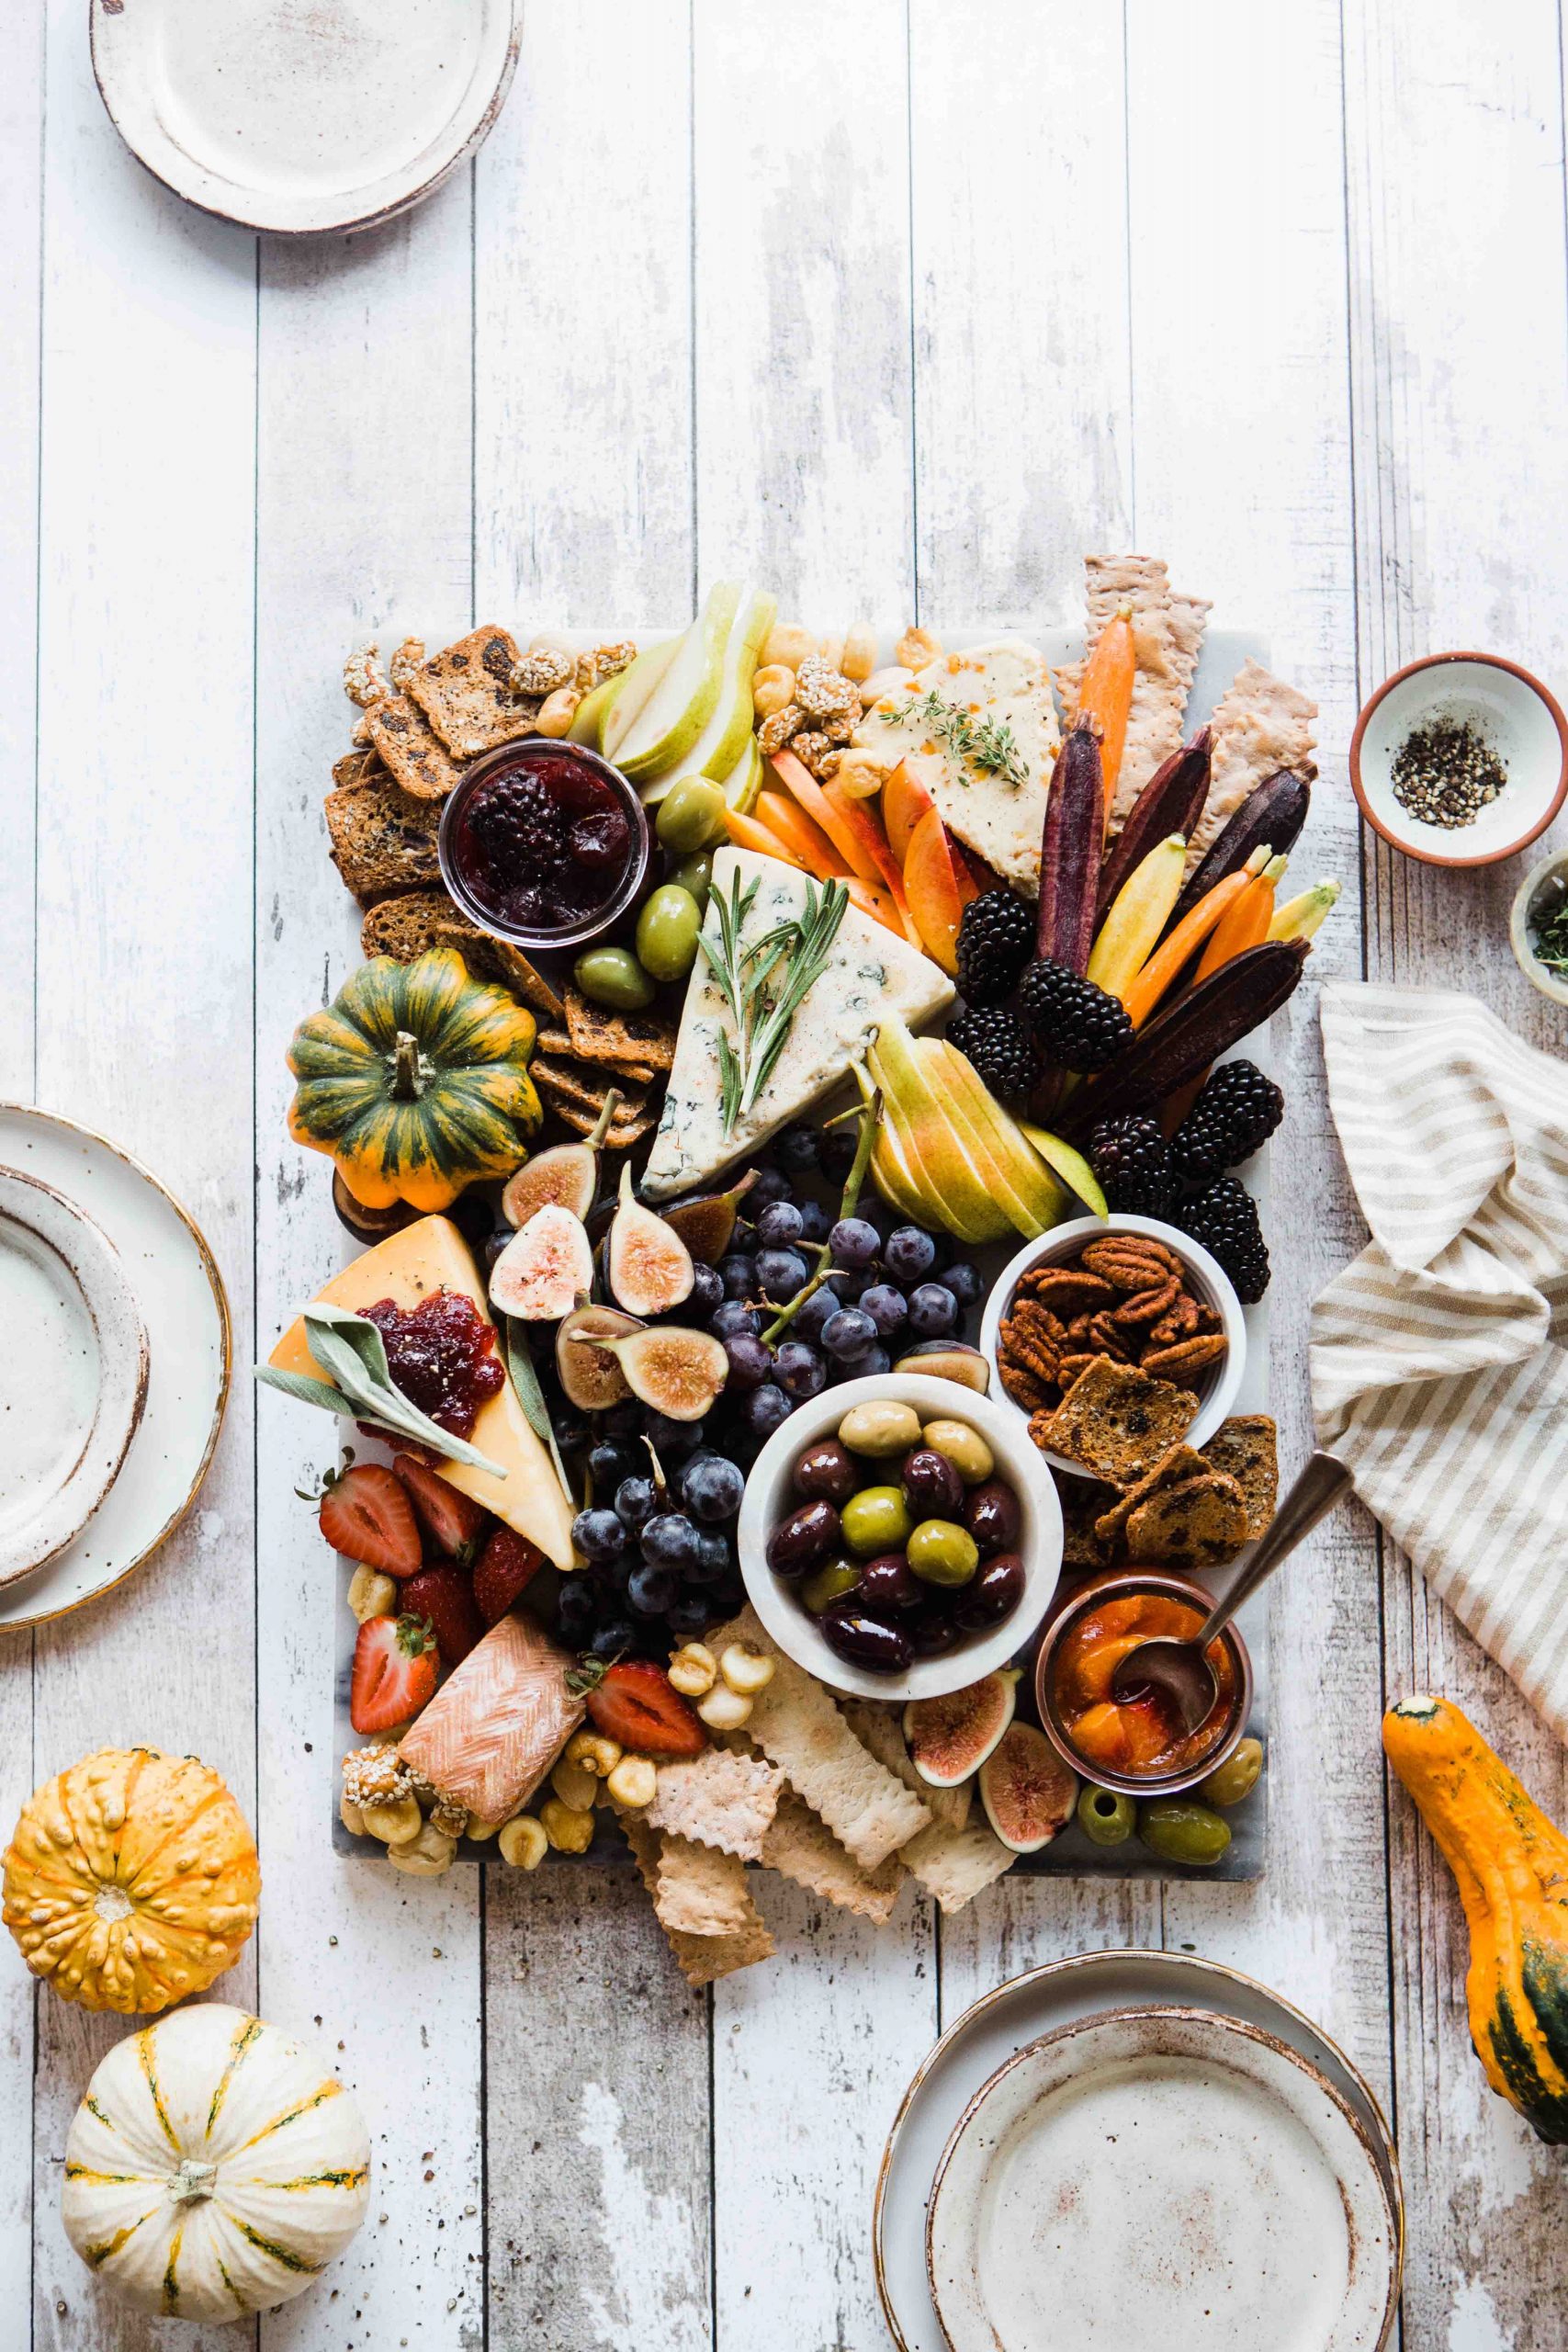 How to make the best fall charcuterie board